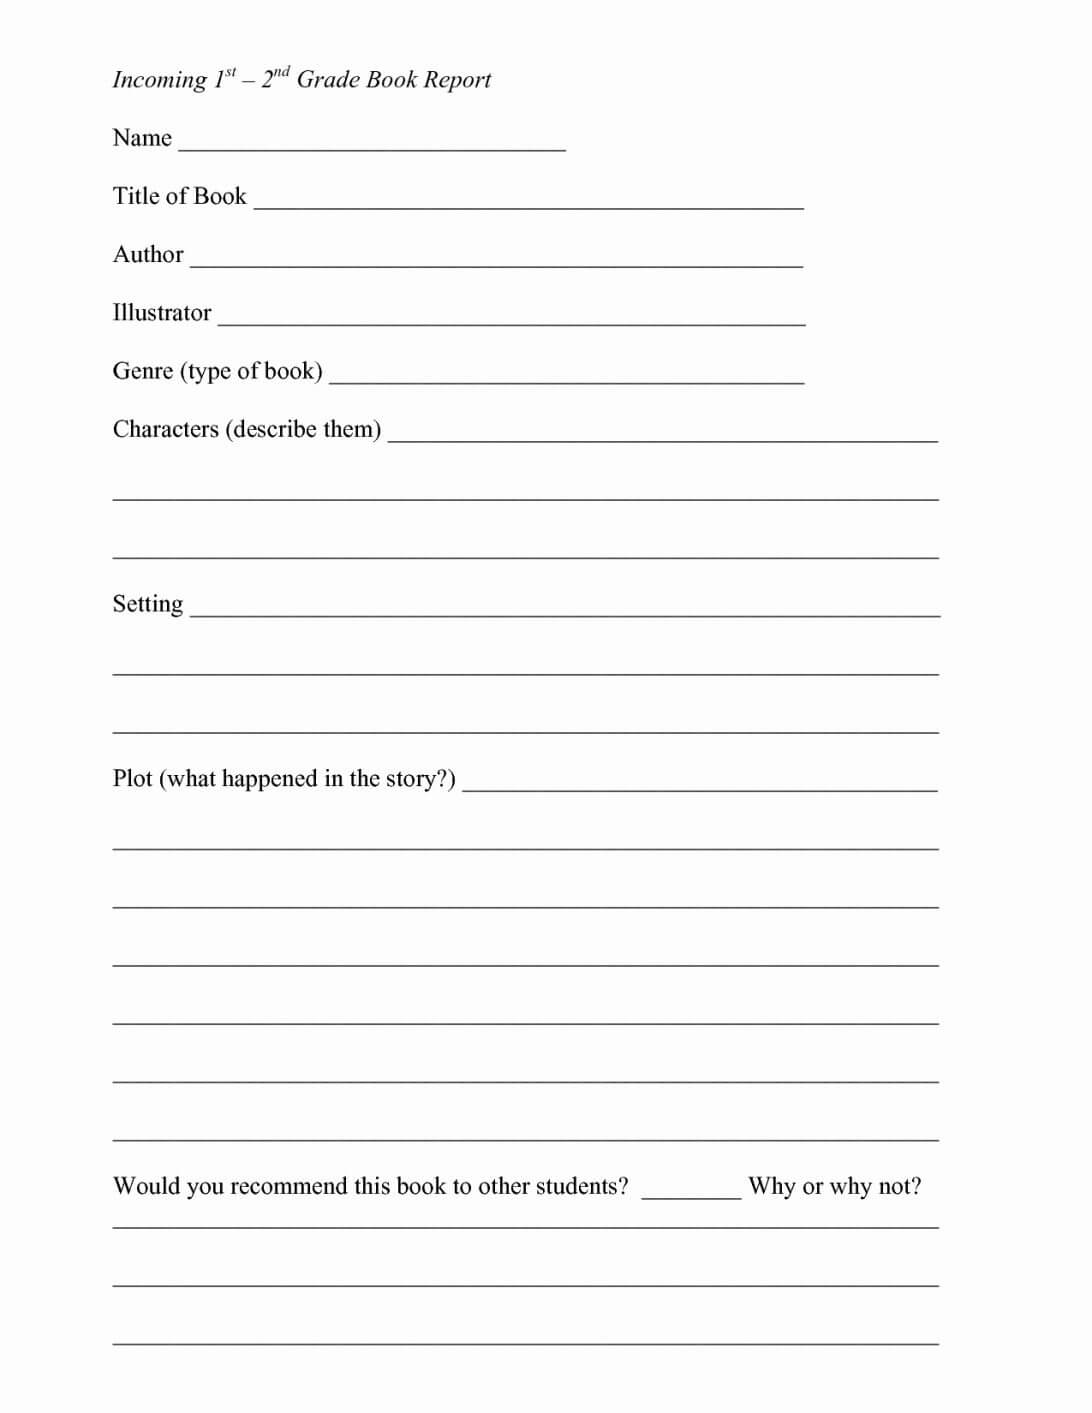 Fiction Book Report Template 6Th Grade For 7Th Graders Pdf Throughout Book Report Template High School